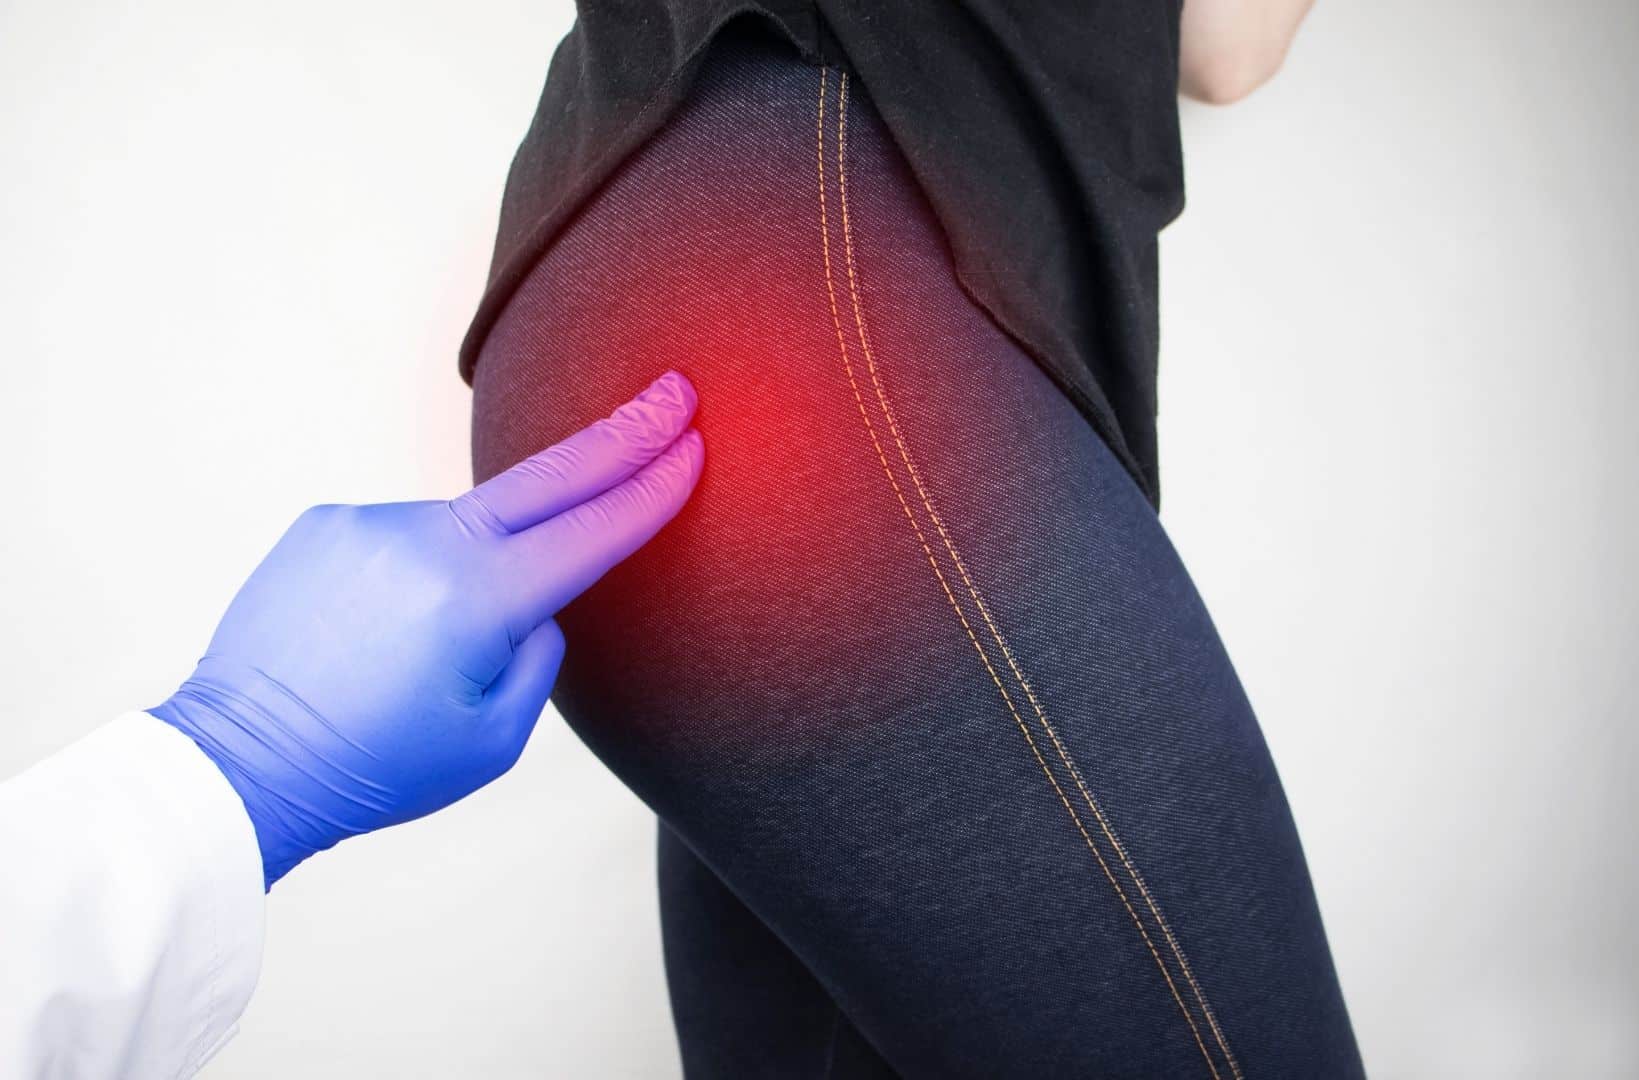 Exercises For IT Band Pain Hip Pain 